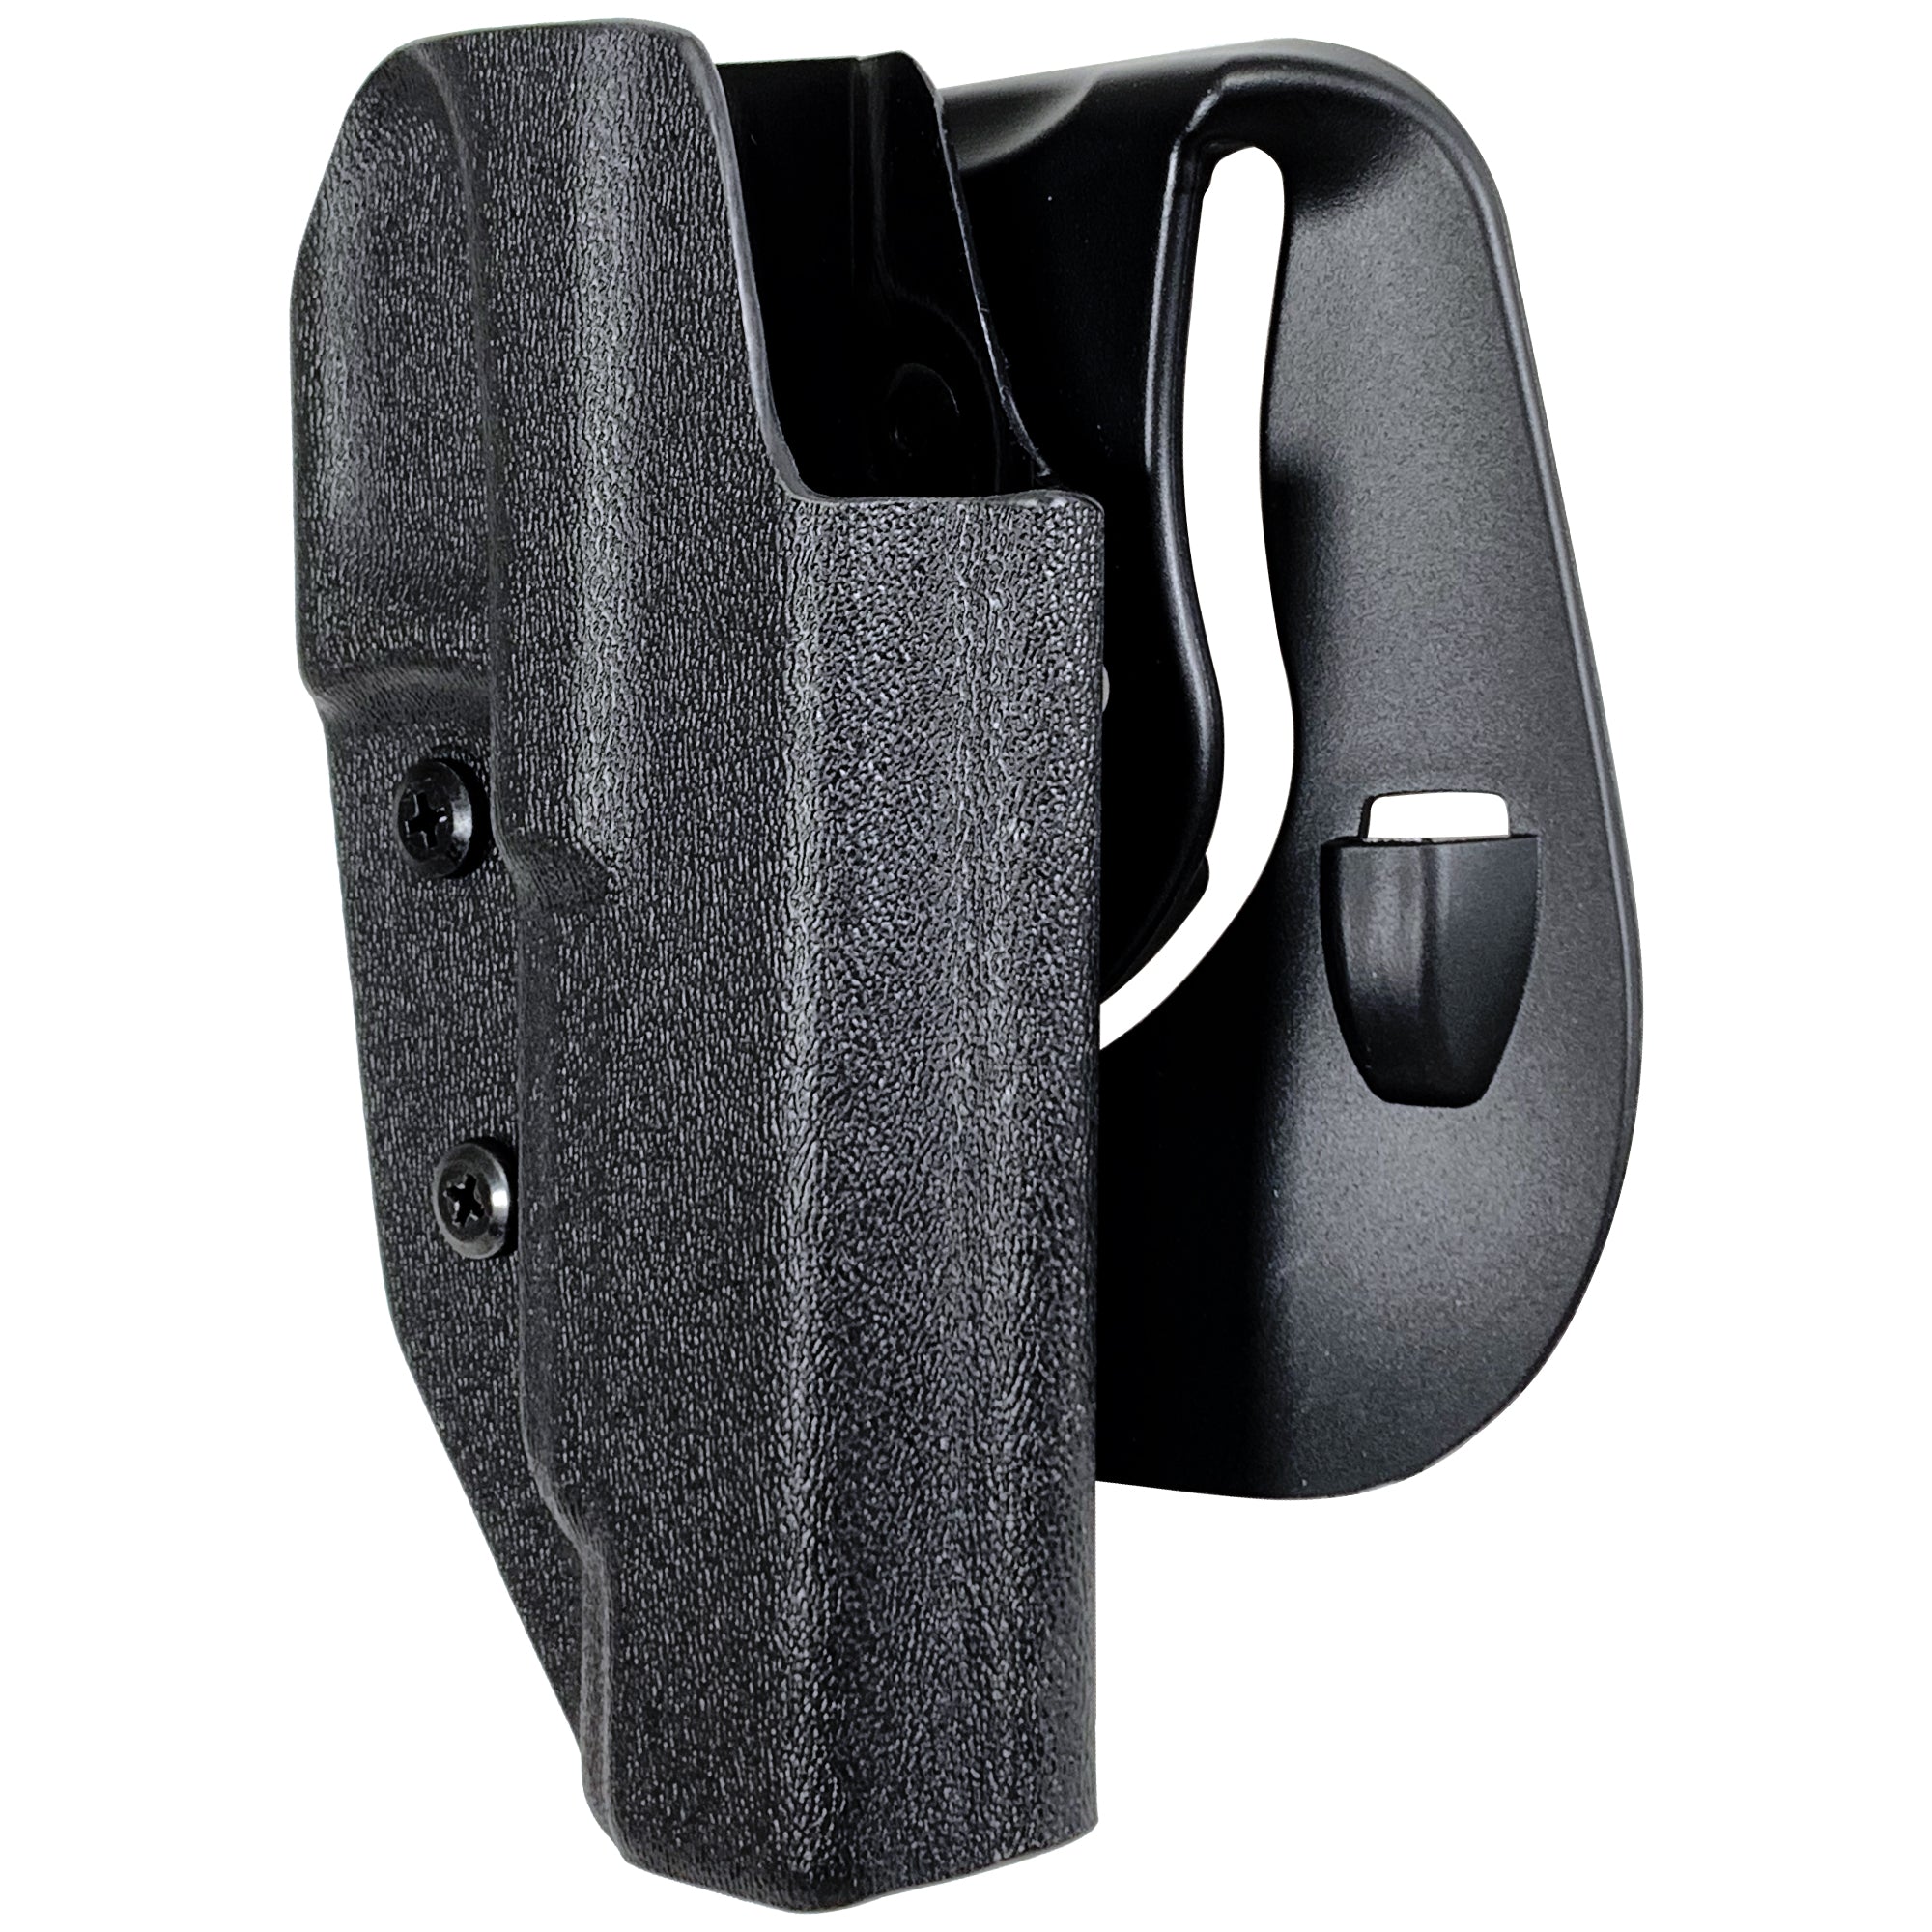 CZ 75 SP-01 OWB Paddle Holster